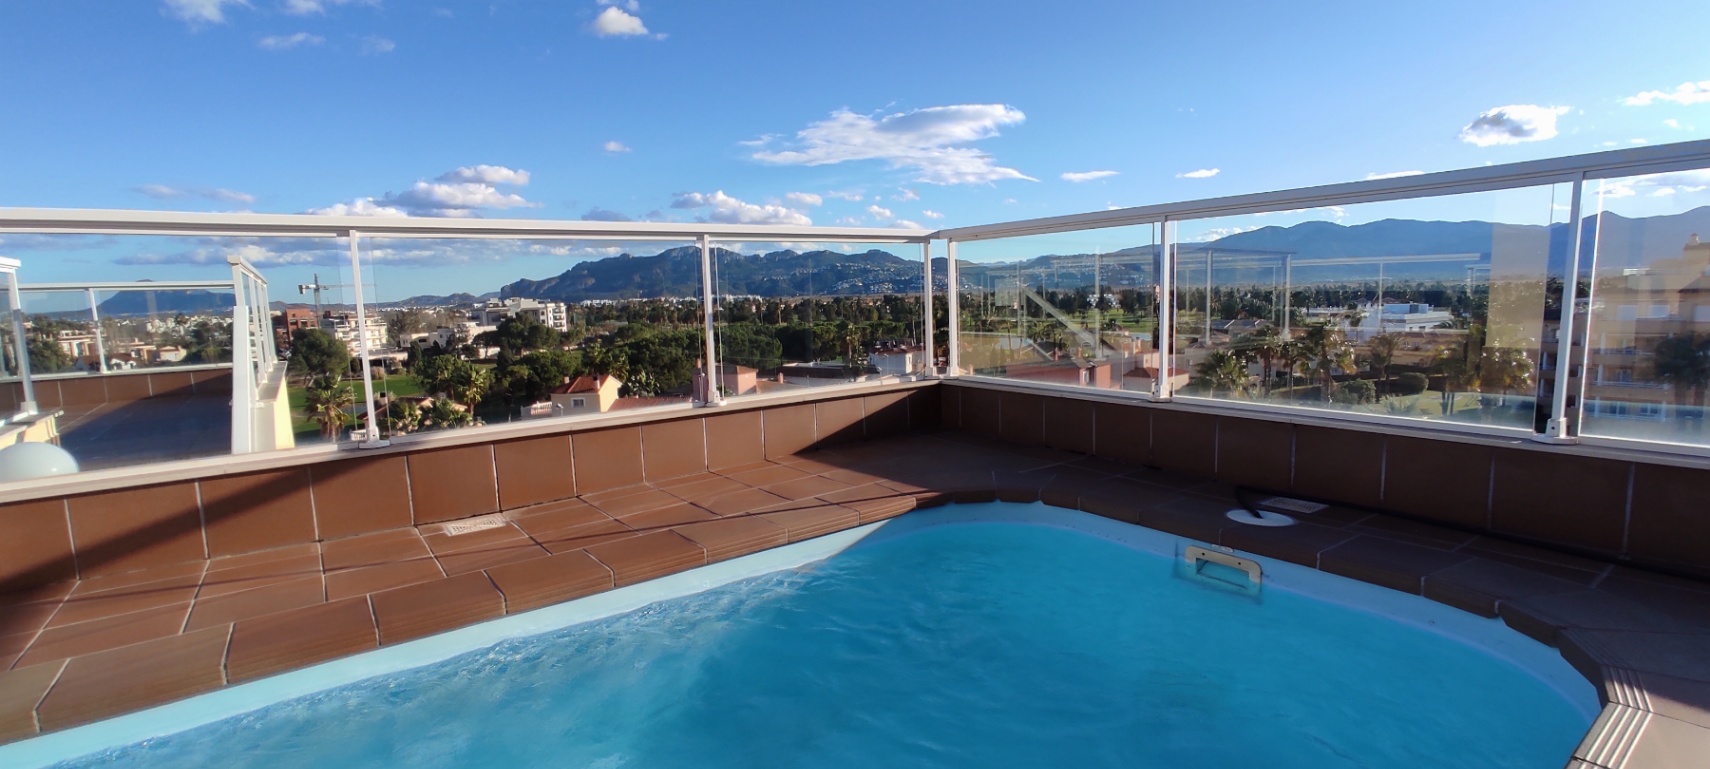 SUPER PENTHOUSE FOR SALE Oliva Nova Golf Resort with private pool.